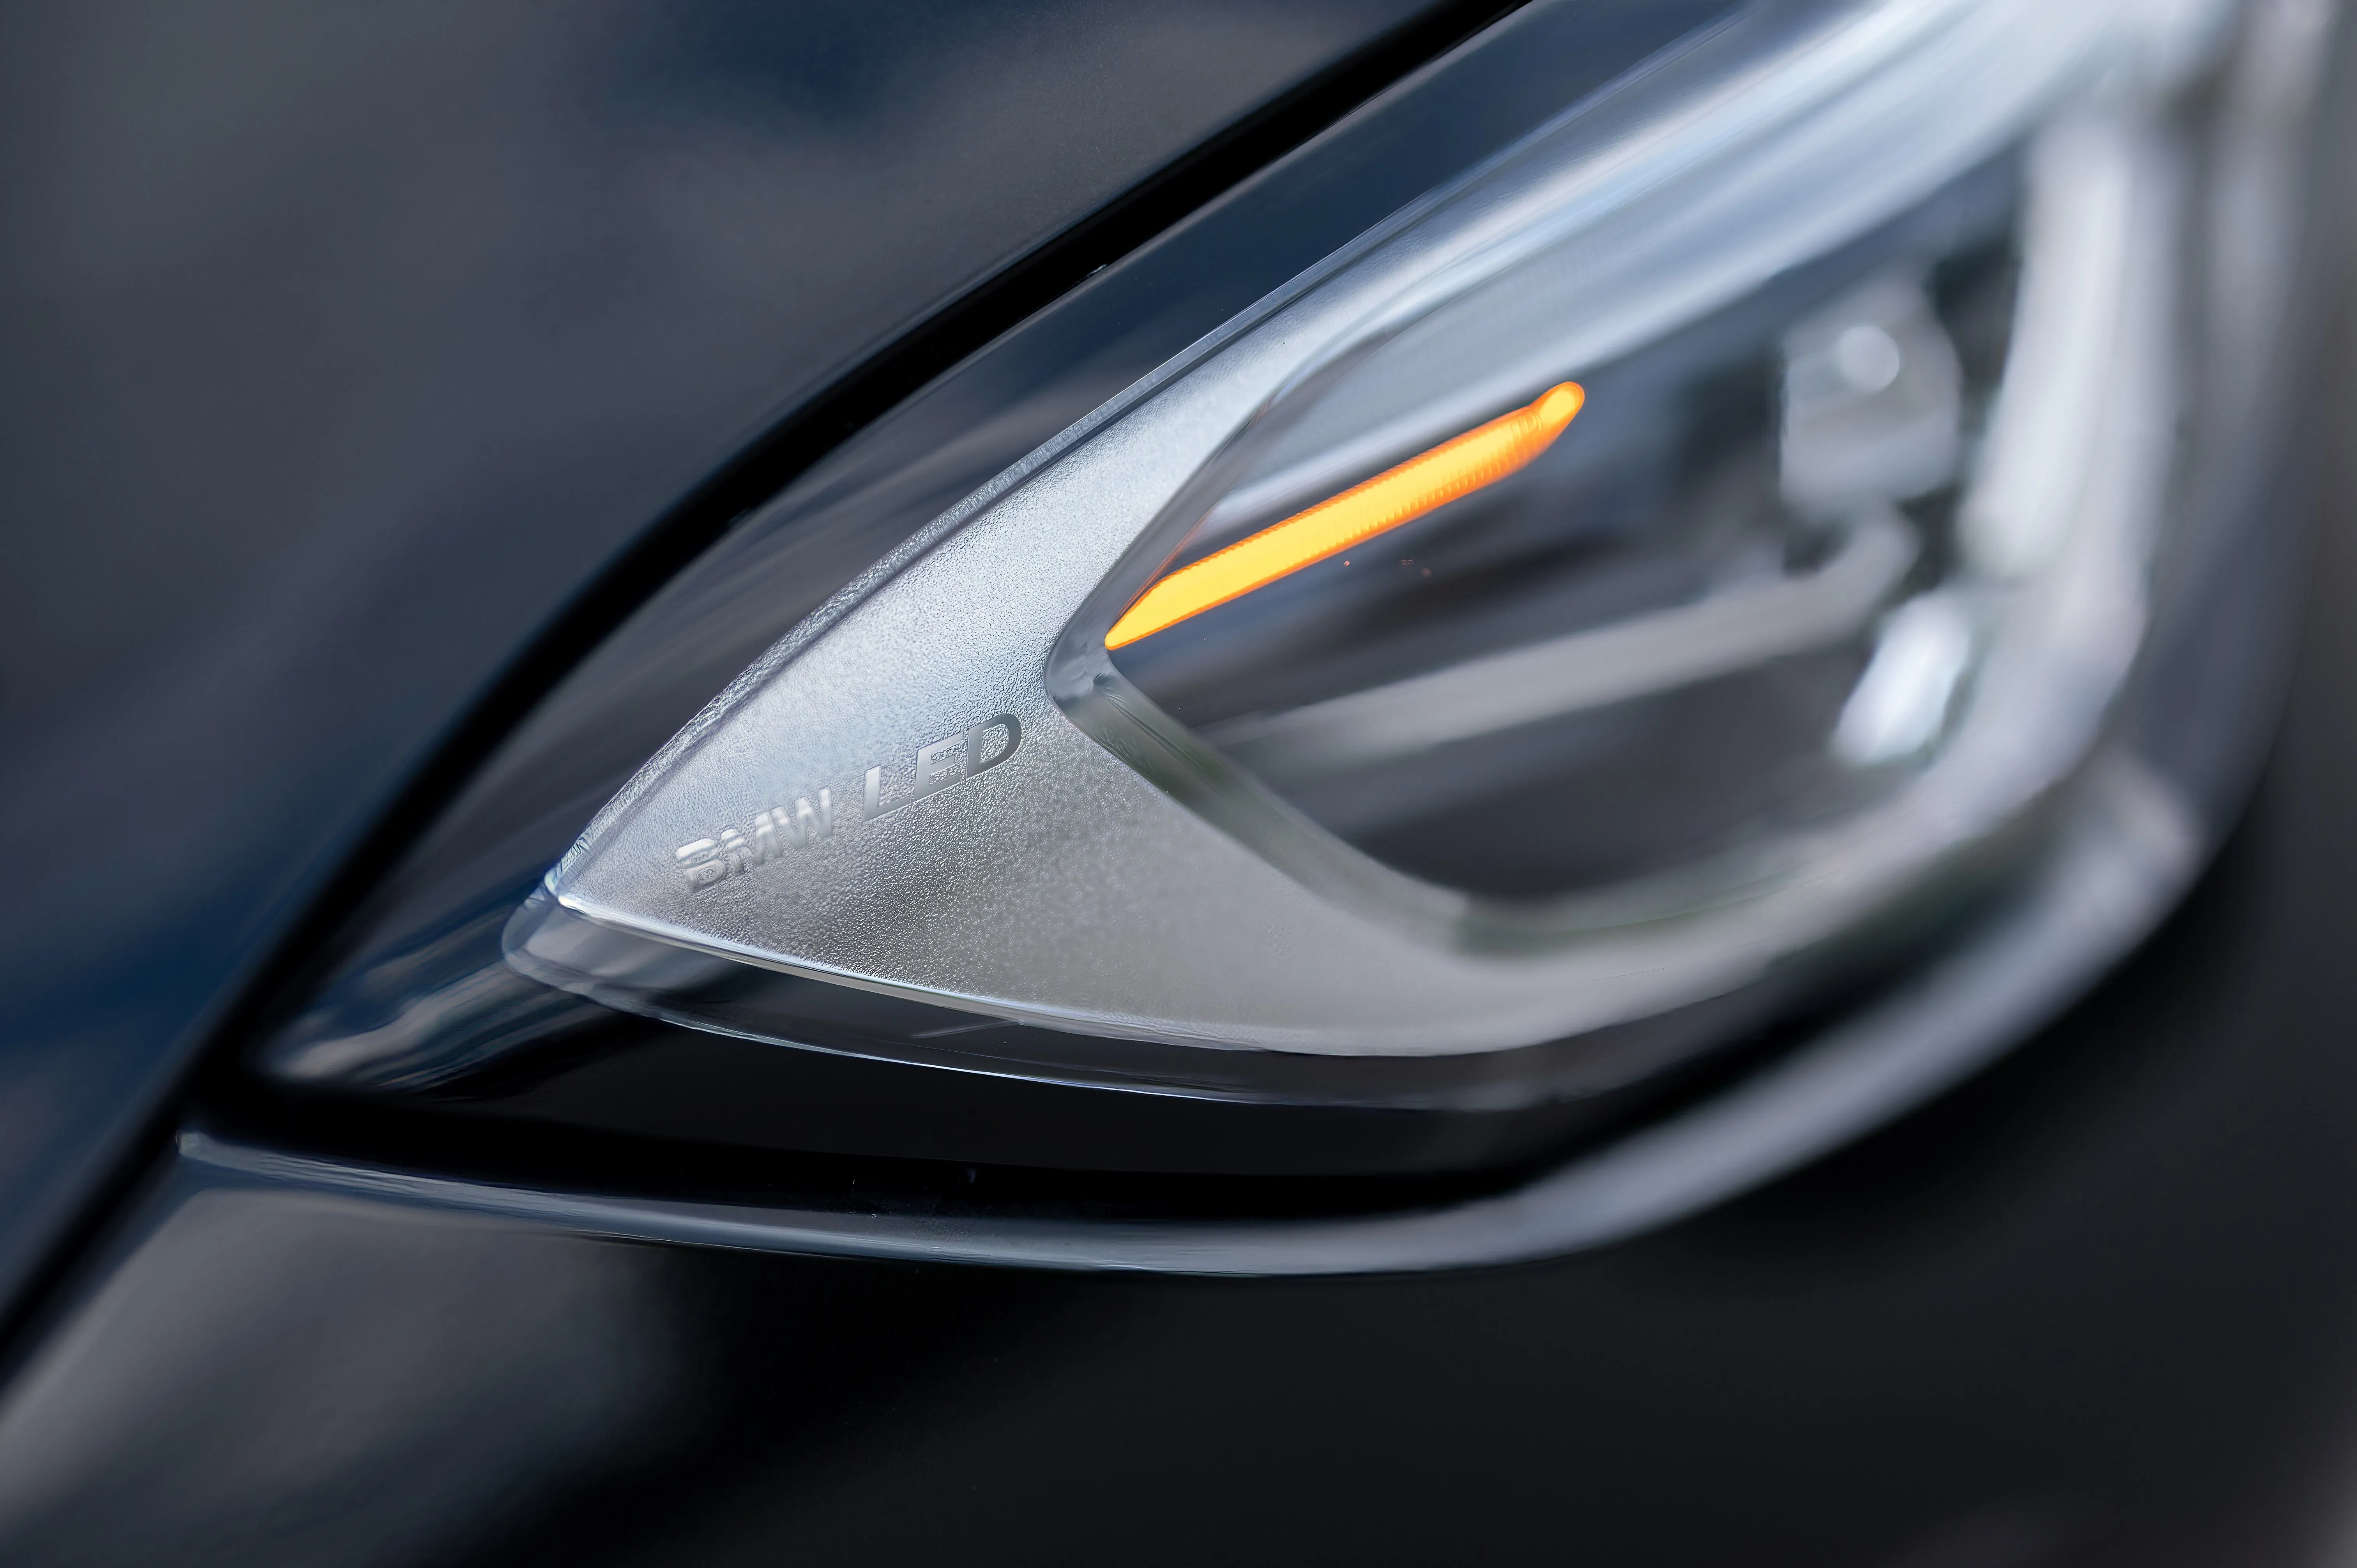 Close-up of a modern car's headlight with LED daytime running lights.